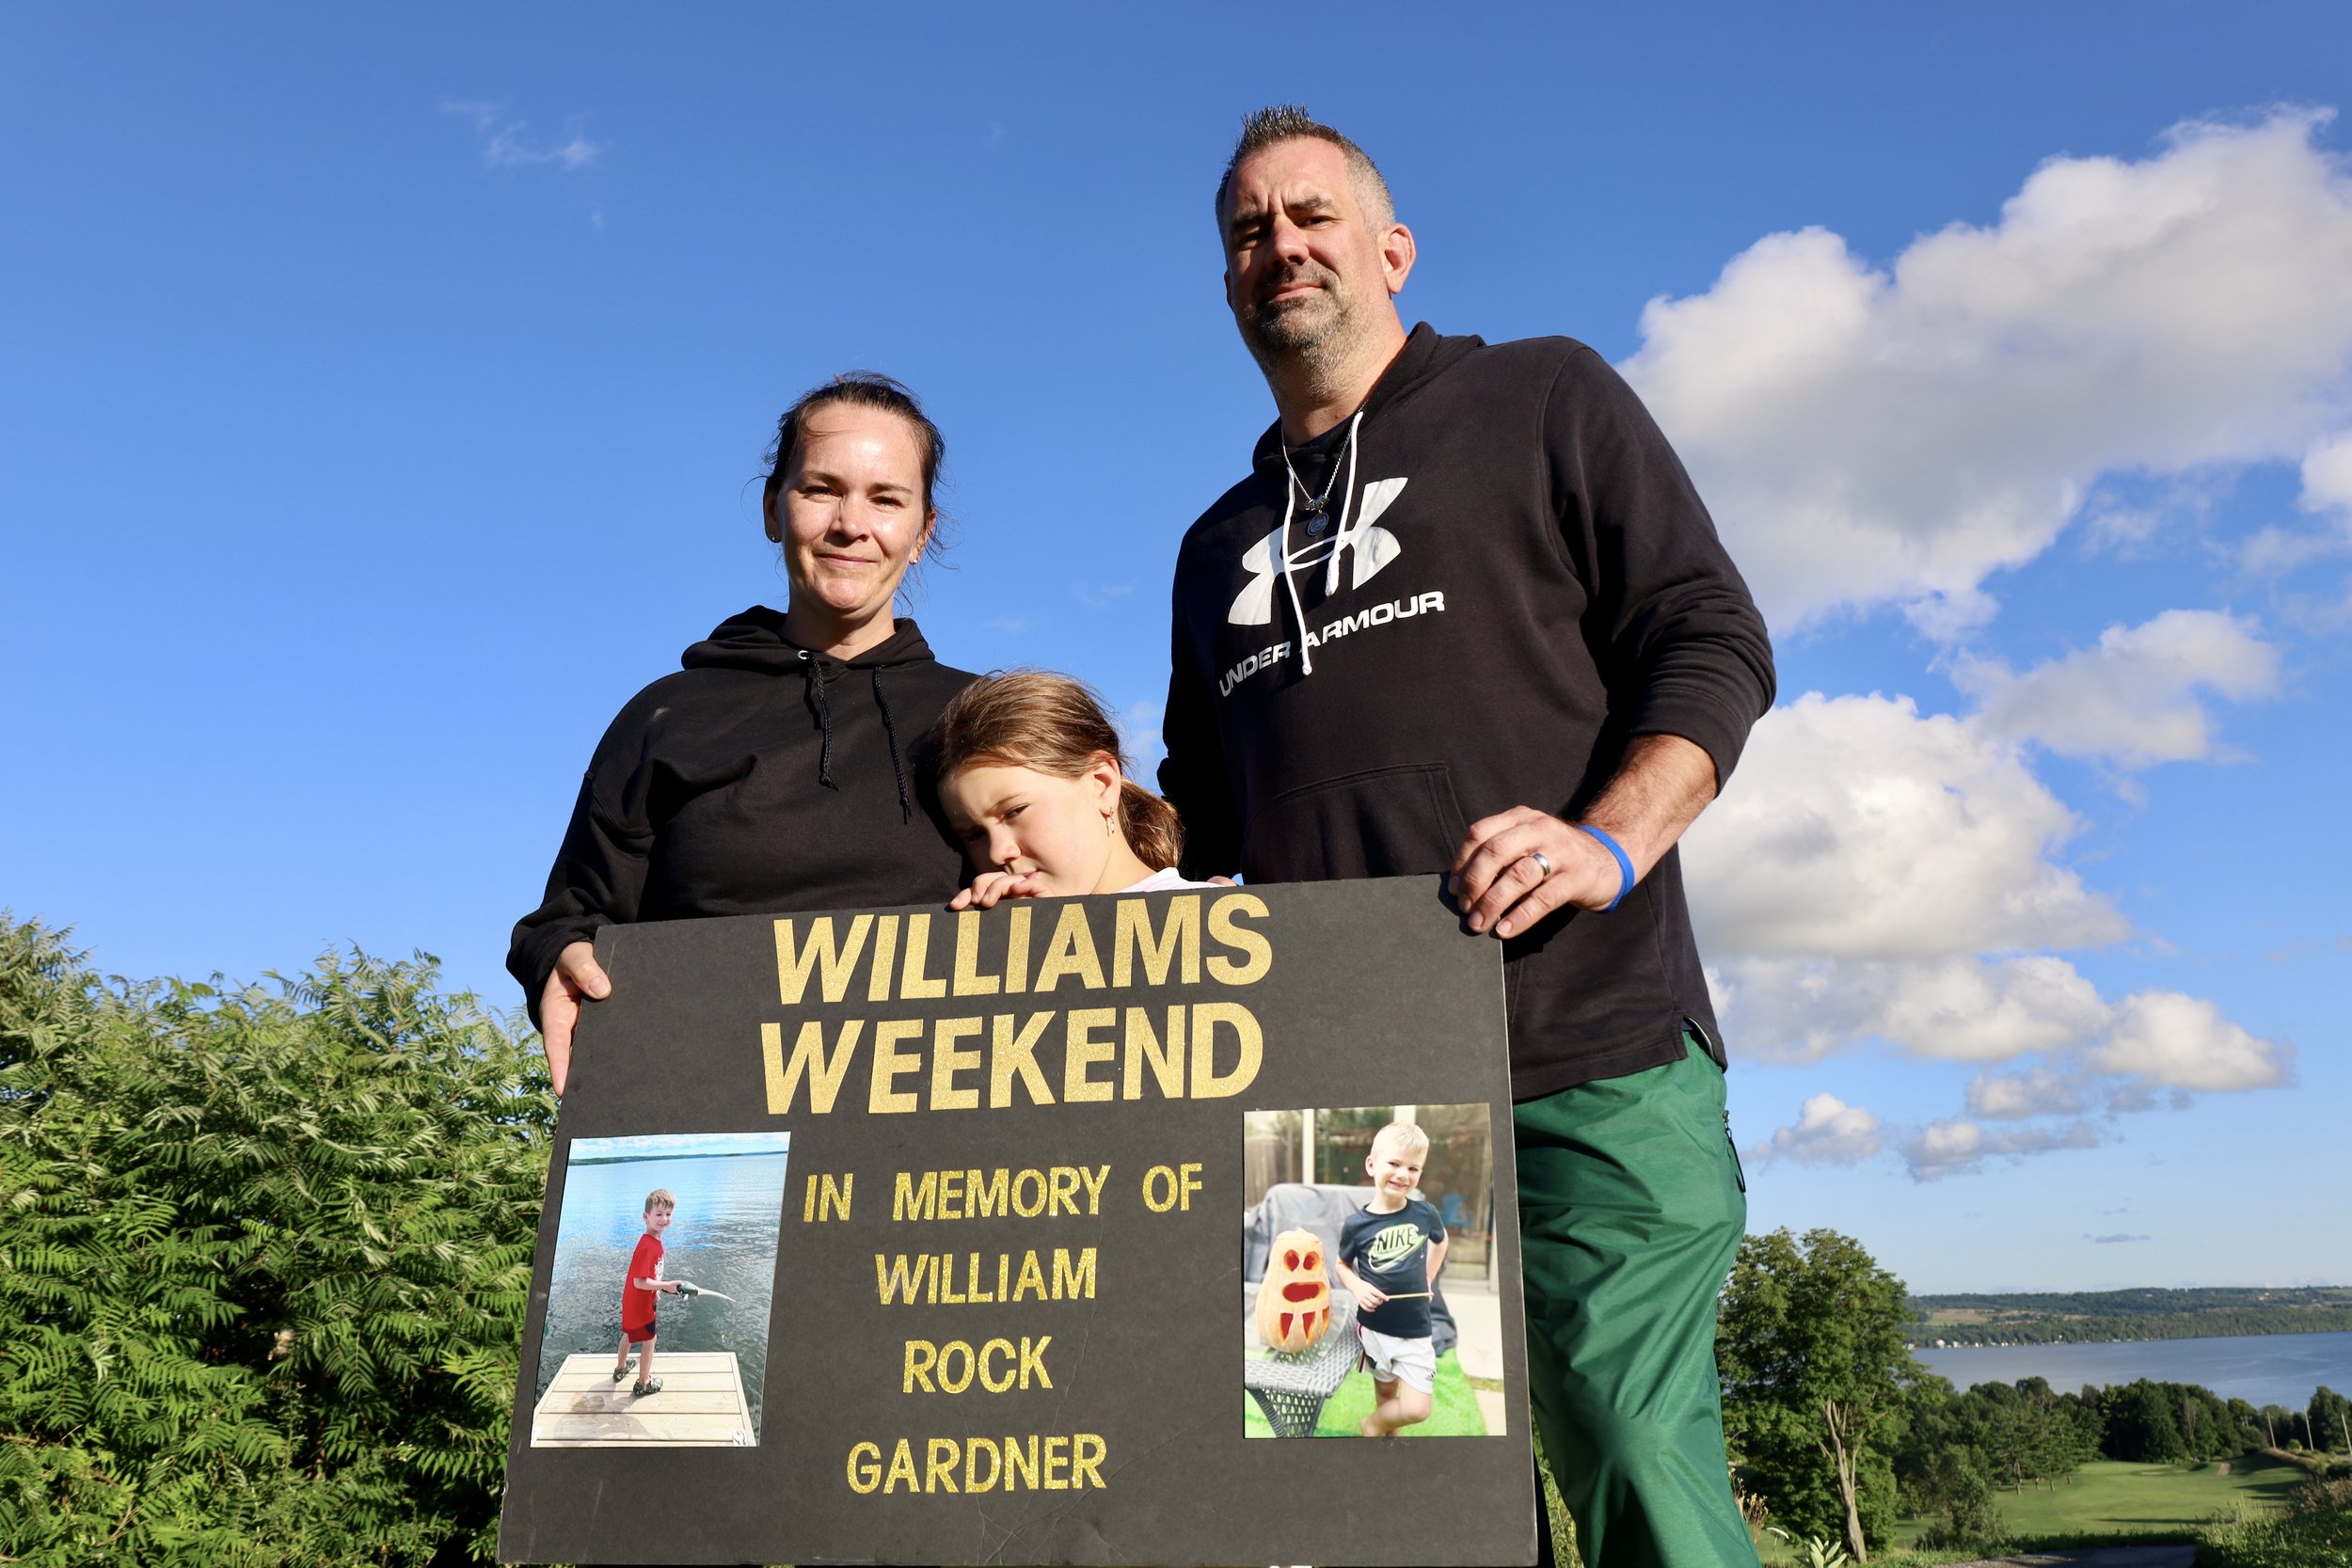 Elizabeth, Aurora and Matthew Gardner on the putting green of Bellmere Winds Golf Resort with the memorial poster of William in his memorial tournament. All photos by David Tuan Bui.